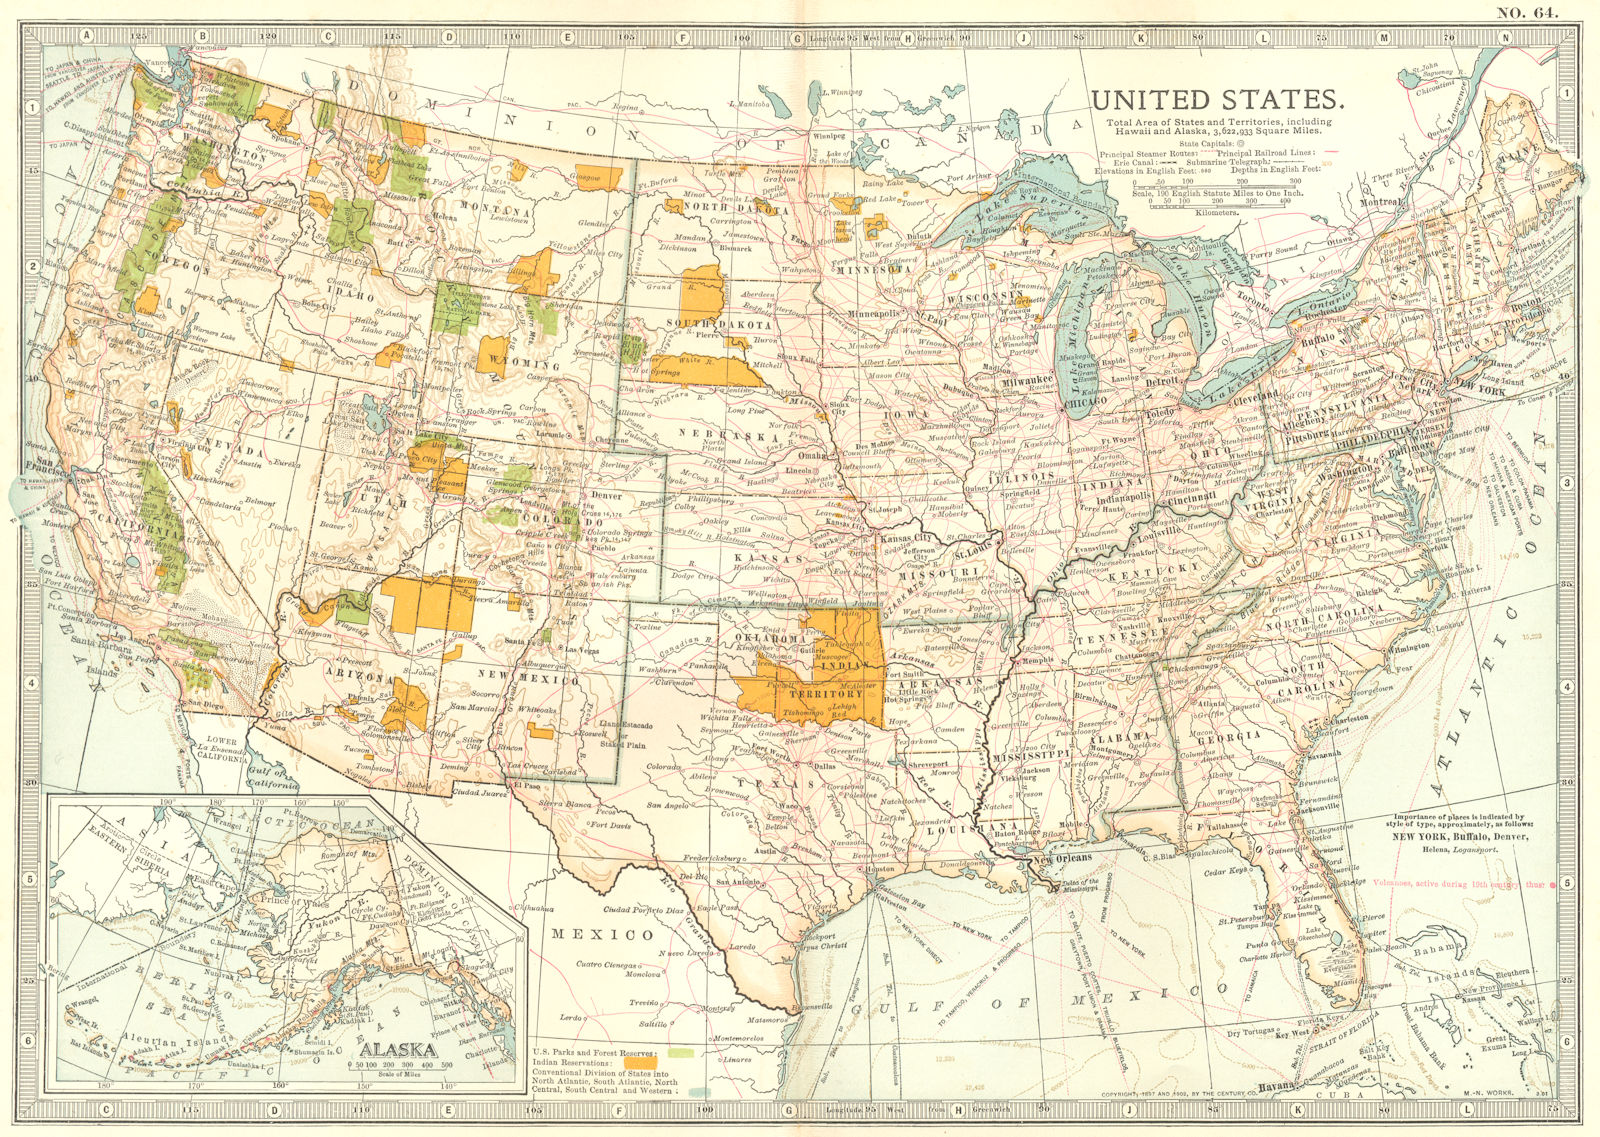 Associate Product USA. United States showing Indian reserves, national park & forests 1903 map